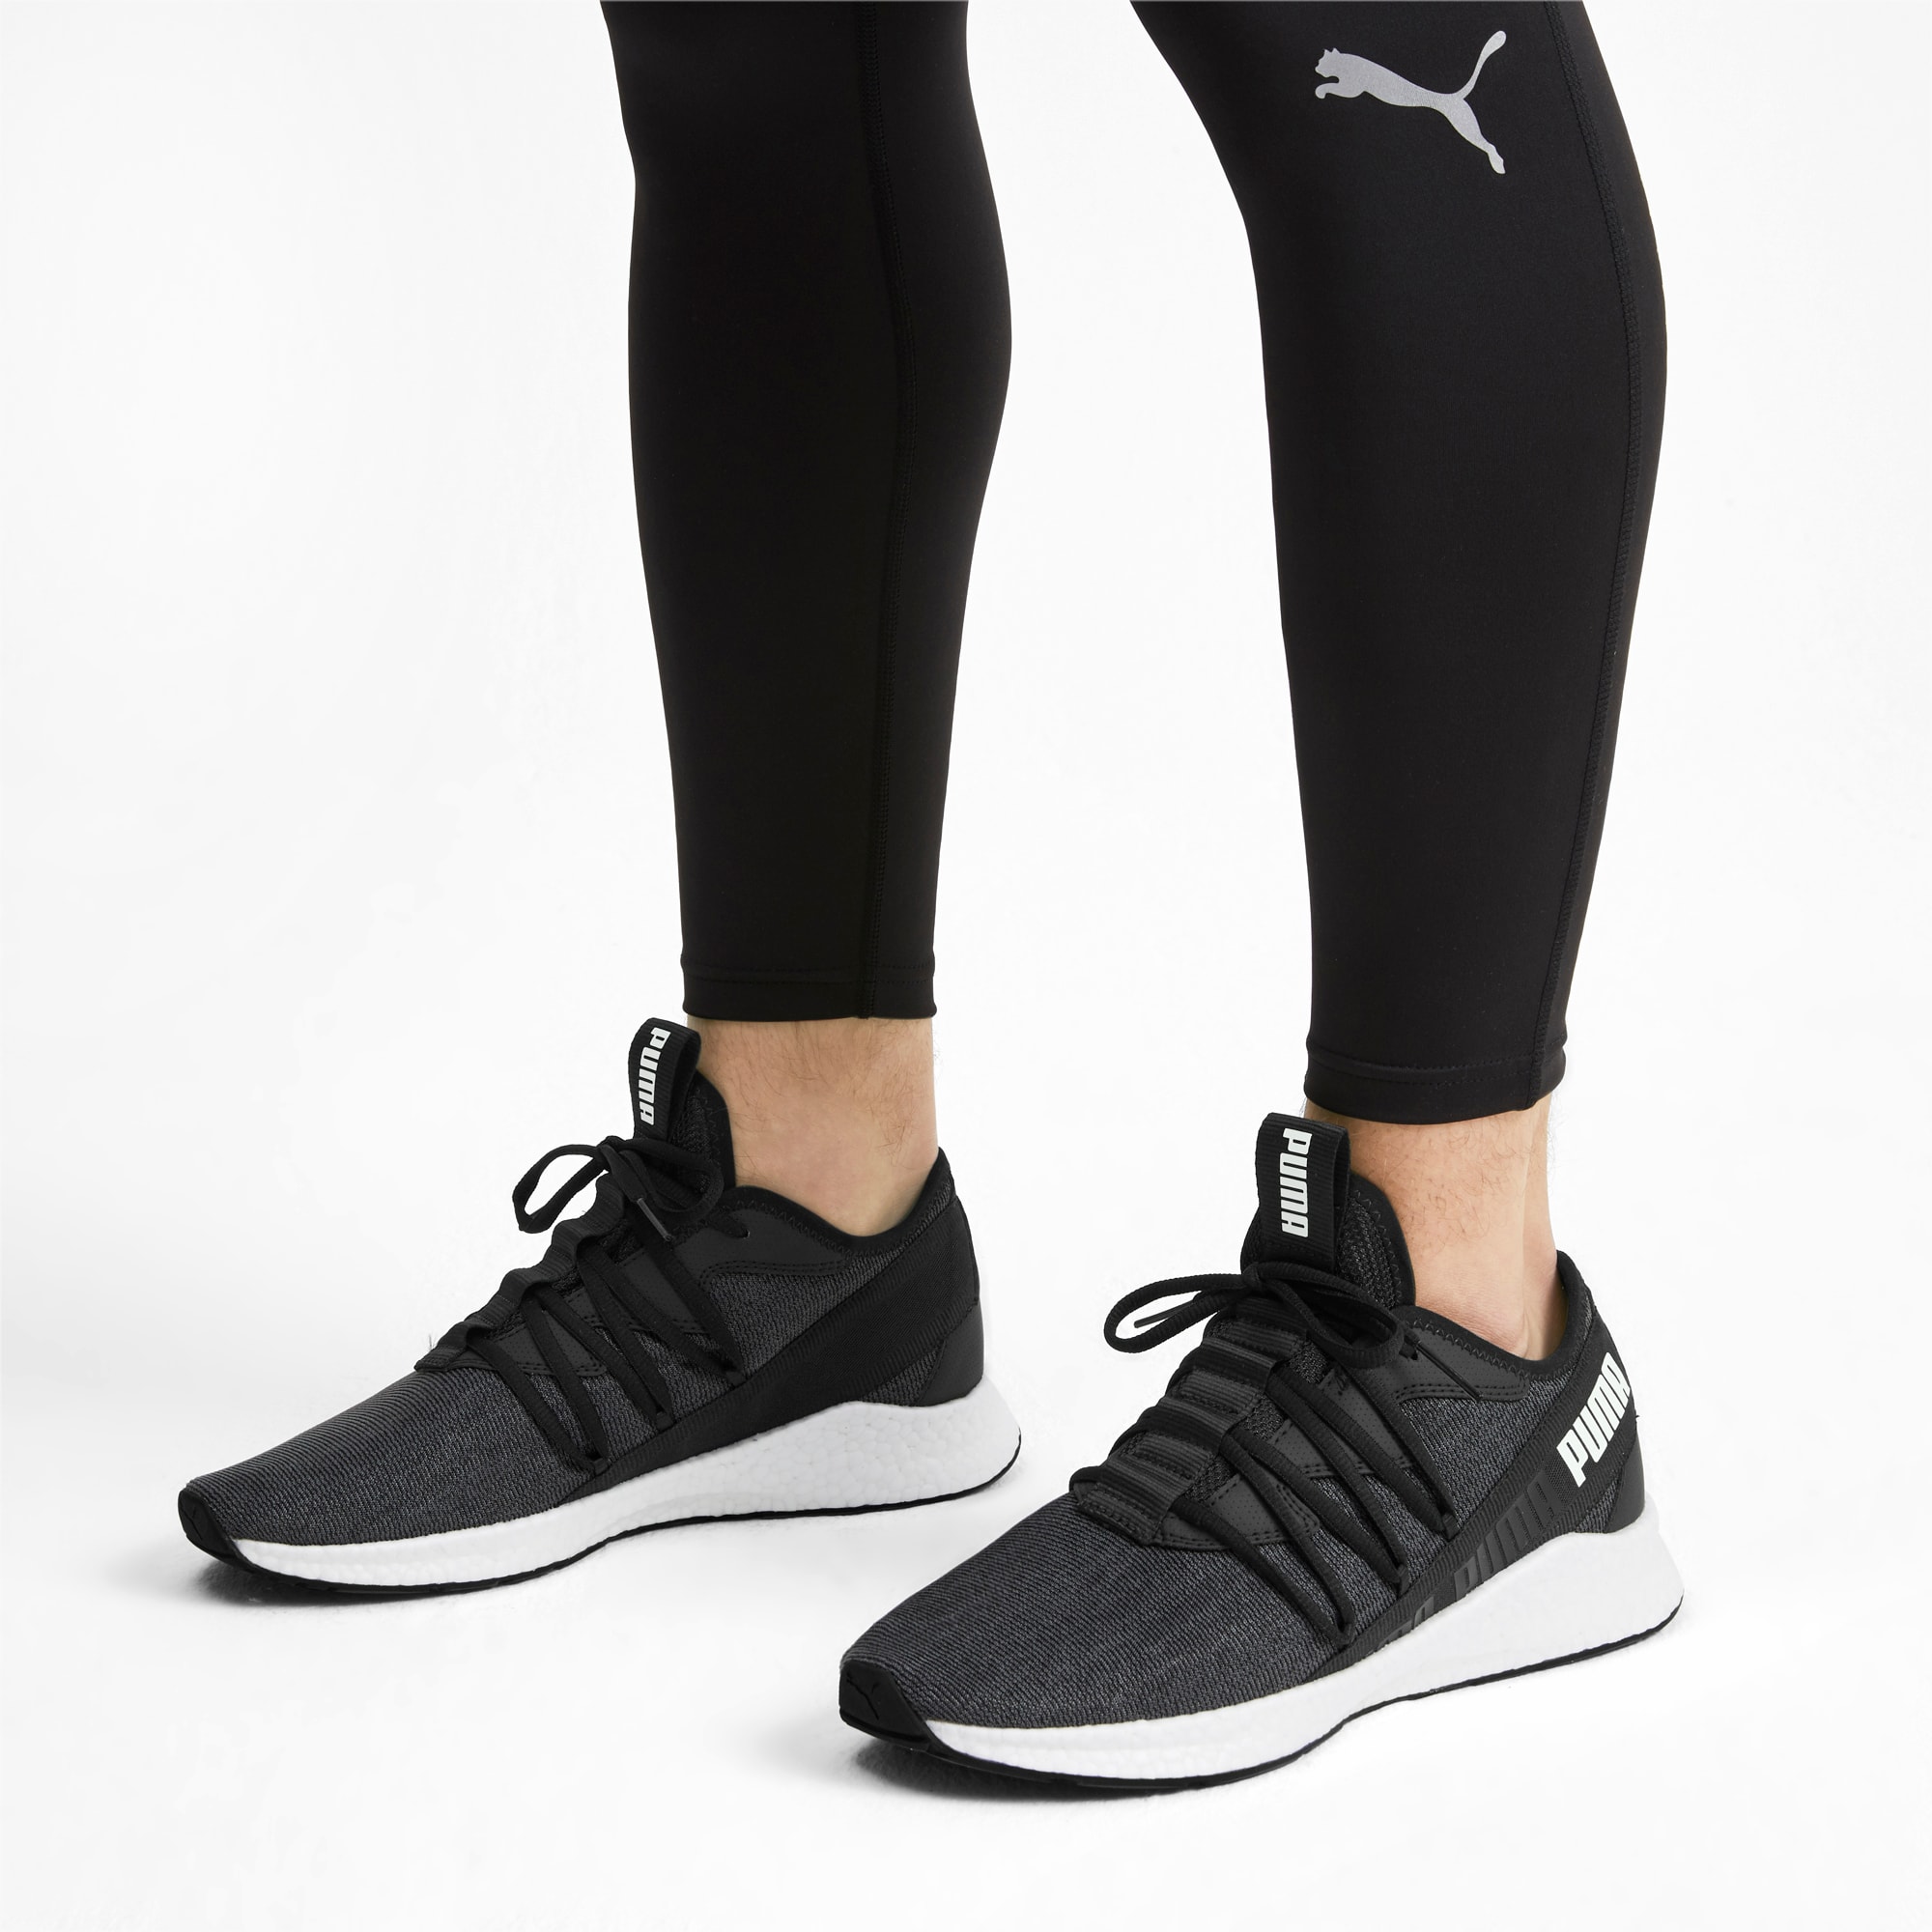 NRGY Star Knit Running Shoes | PUMA 